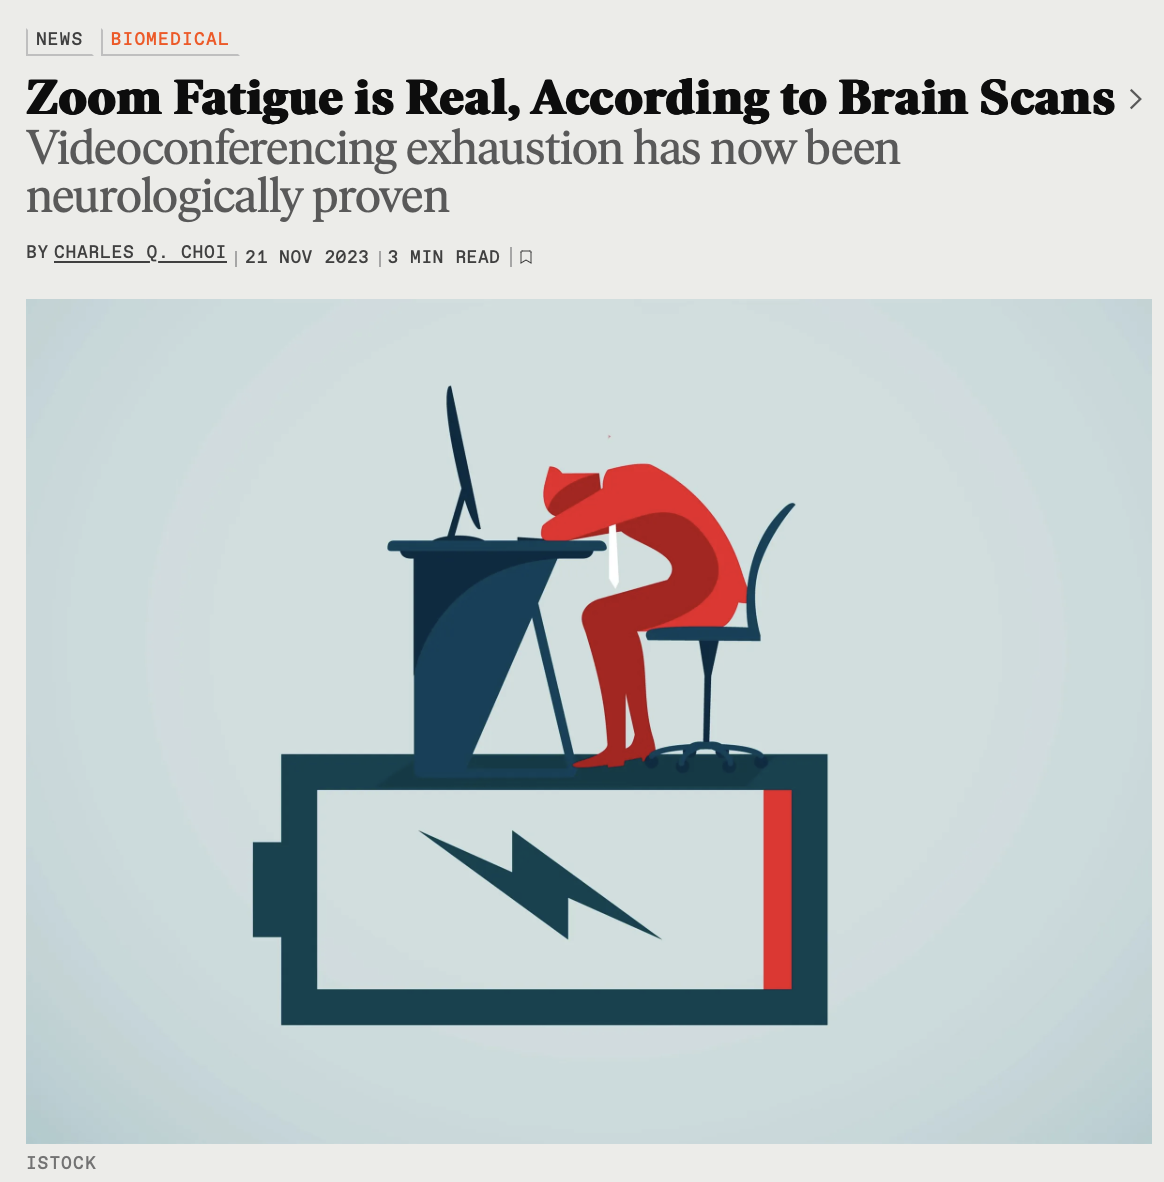 Videoconferencing exhaustion has now been neurologically proven